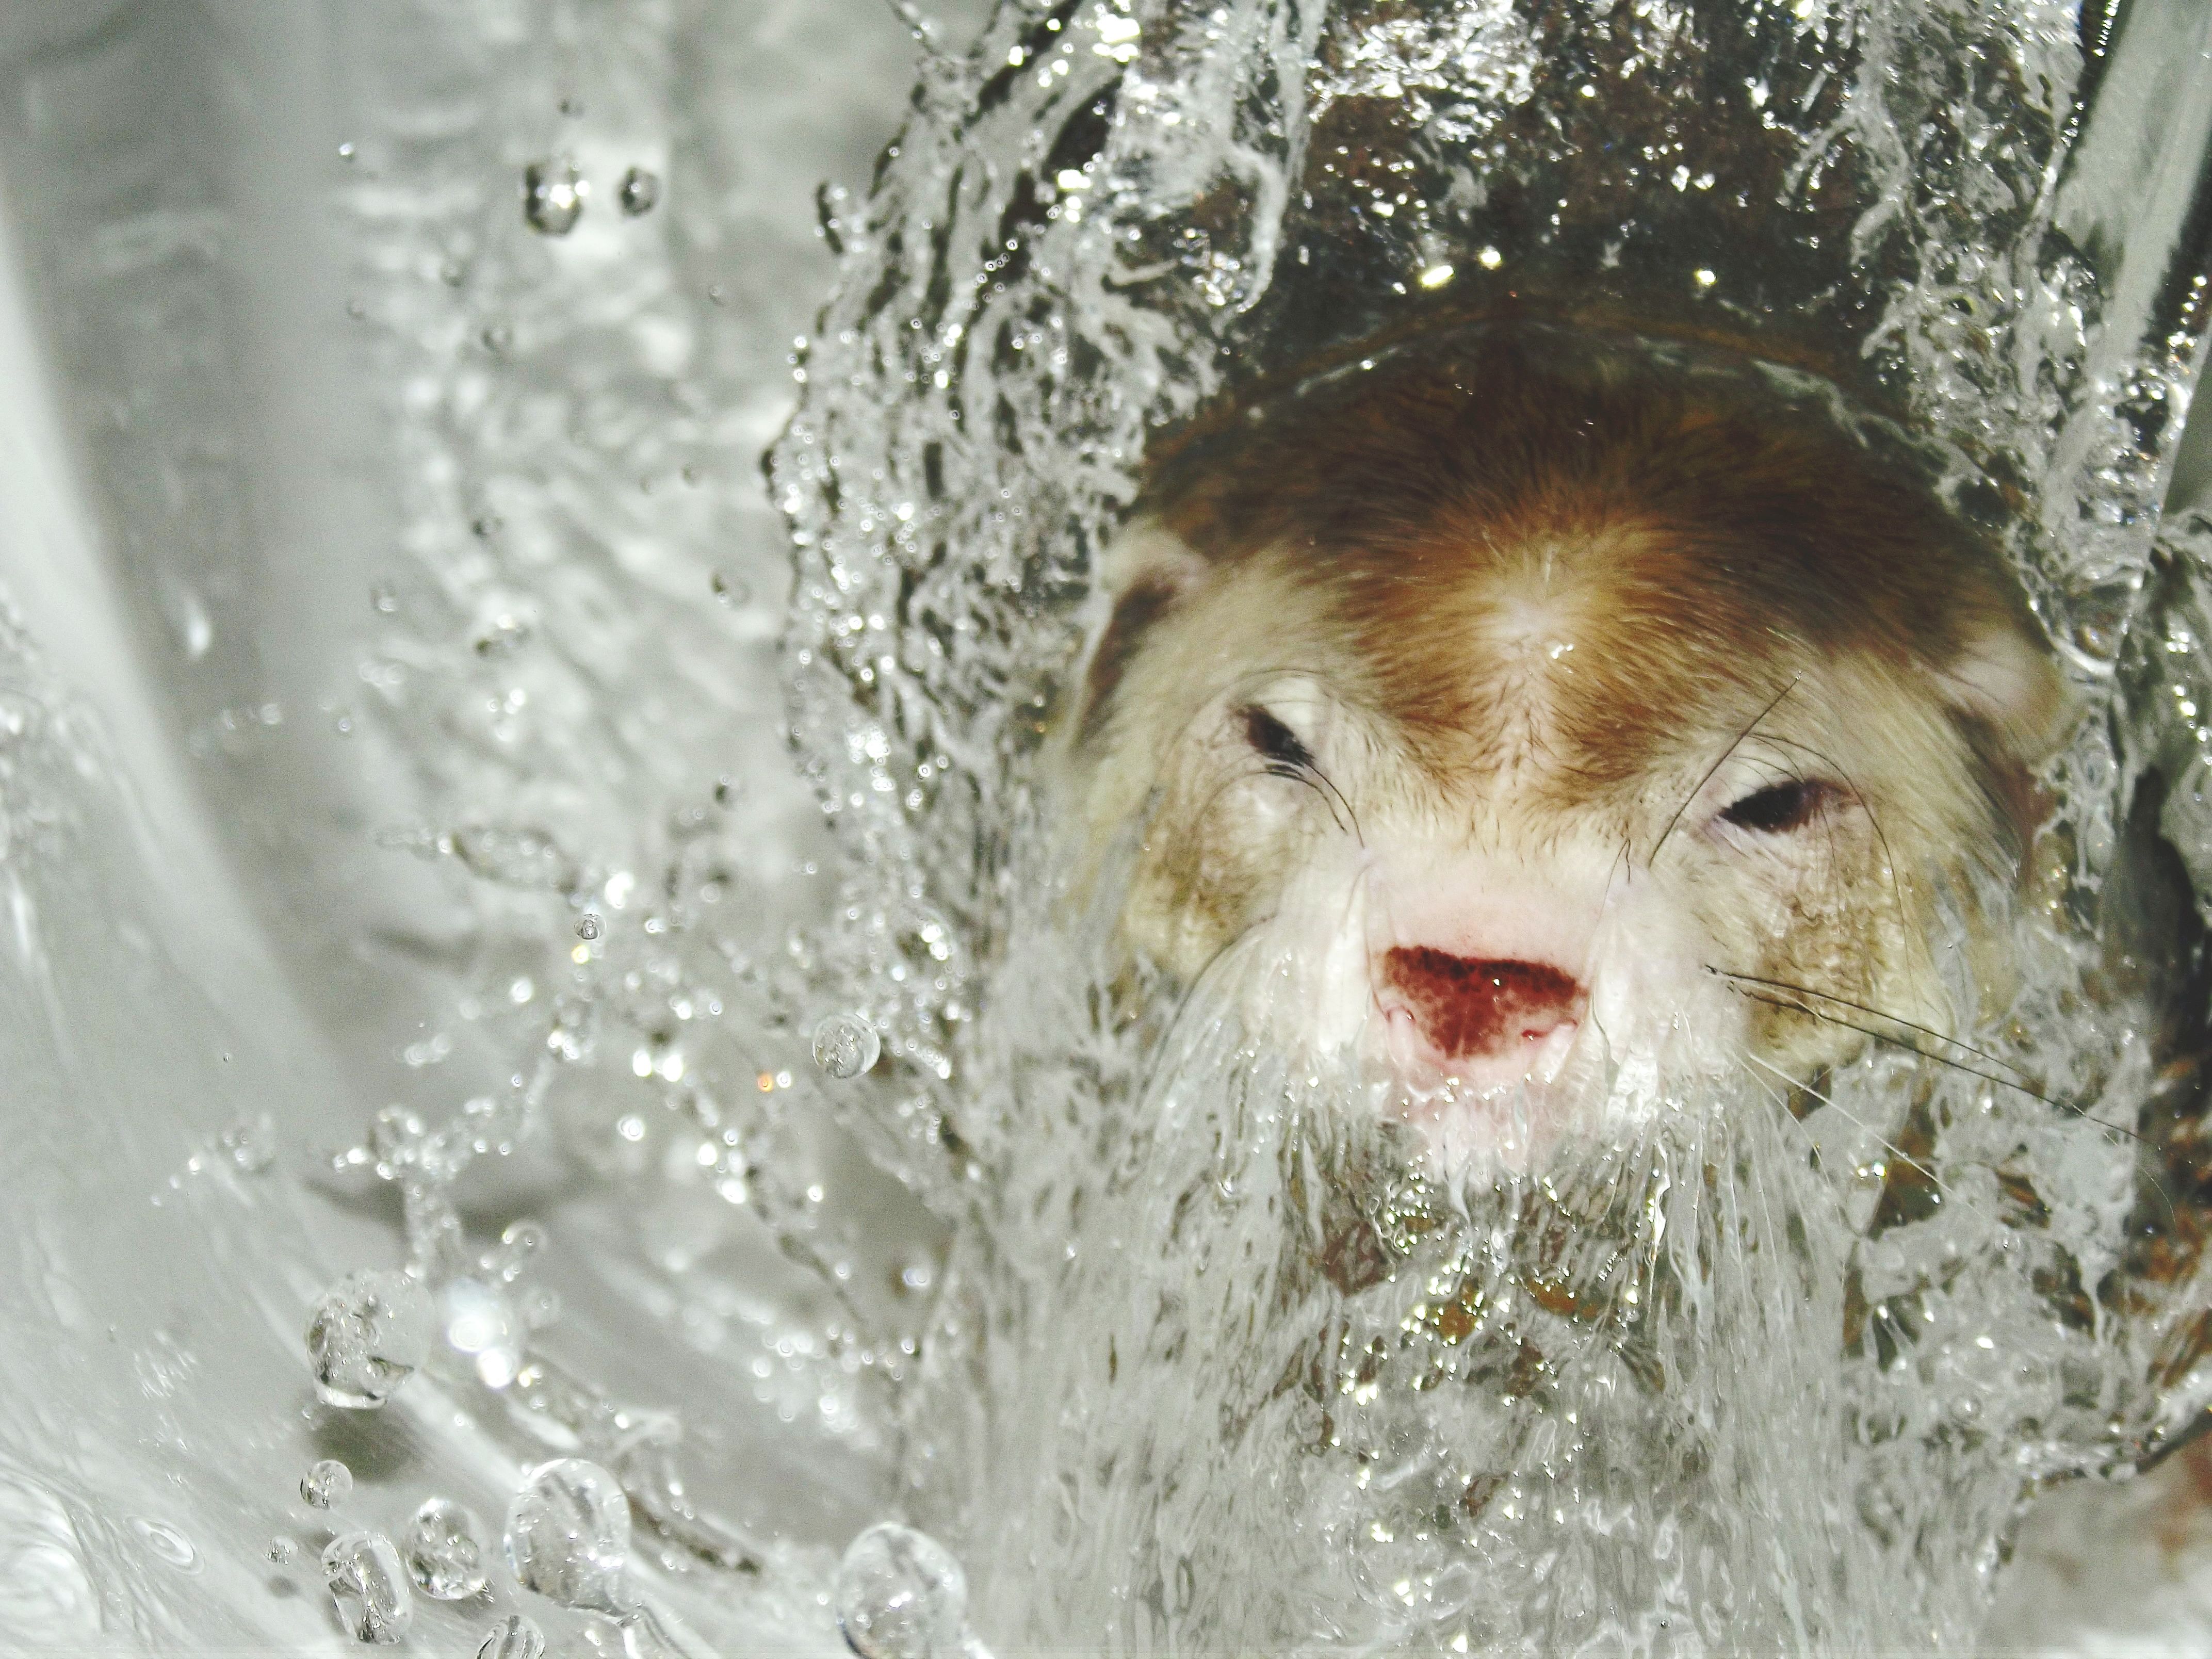 Close-Up Of Ferret In Water